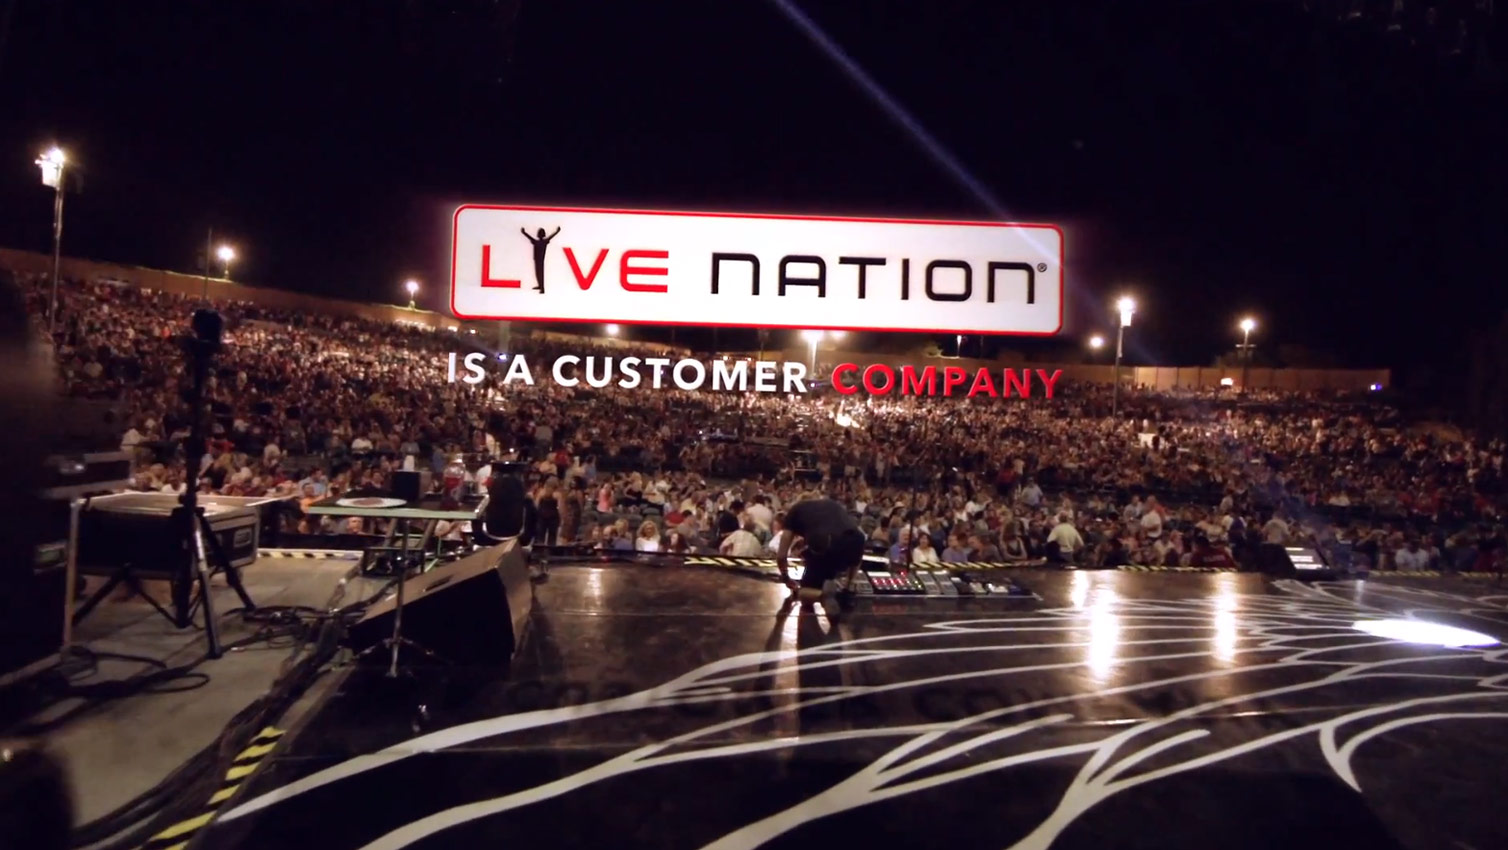 Live Nation: Extracting More Value Out of the Concert Experience